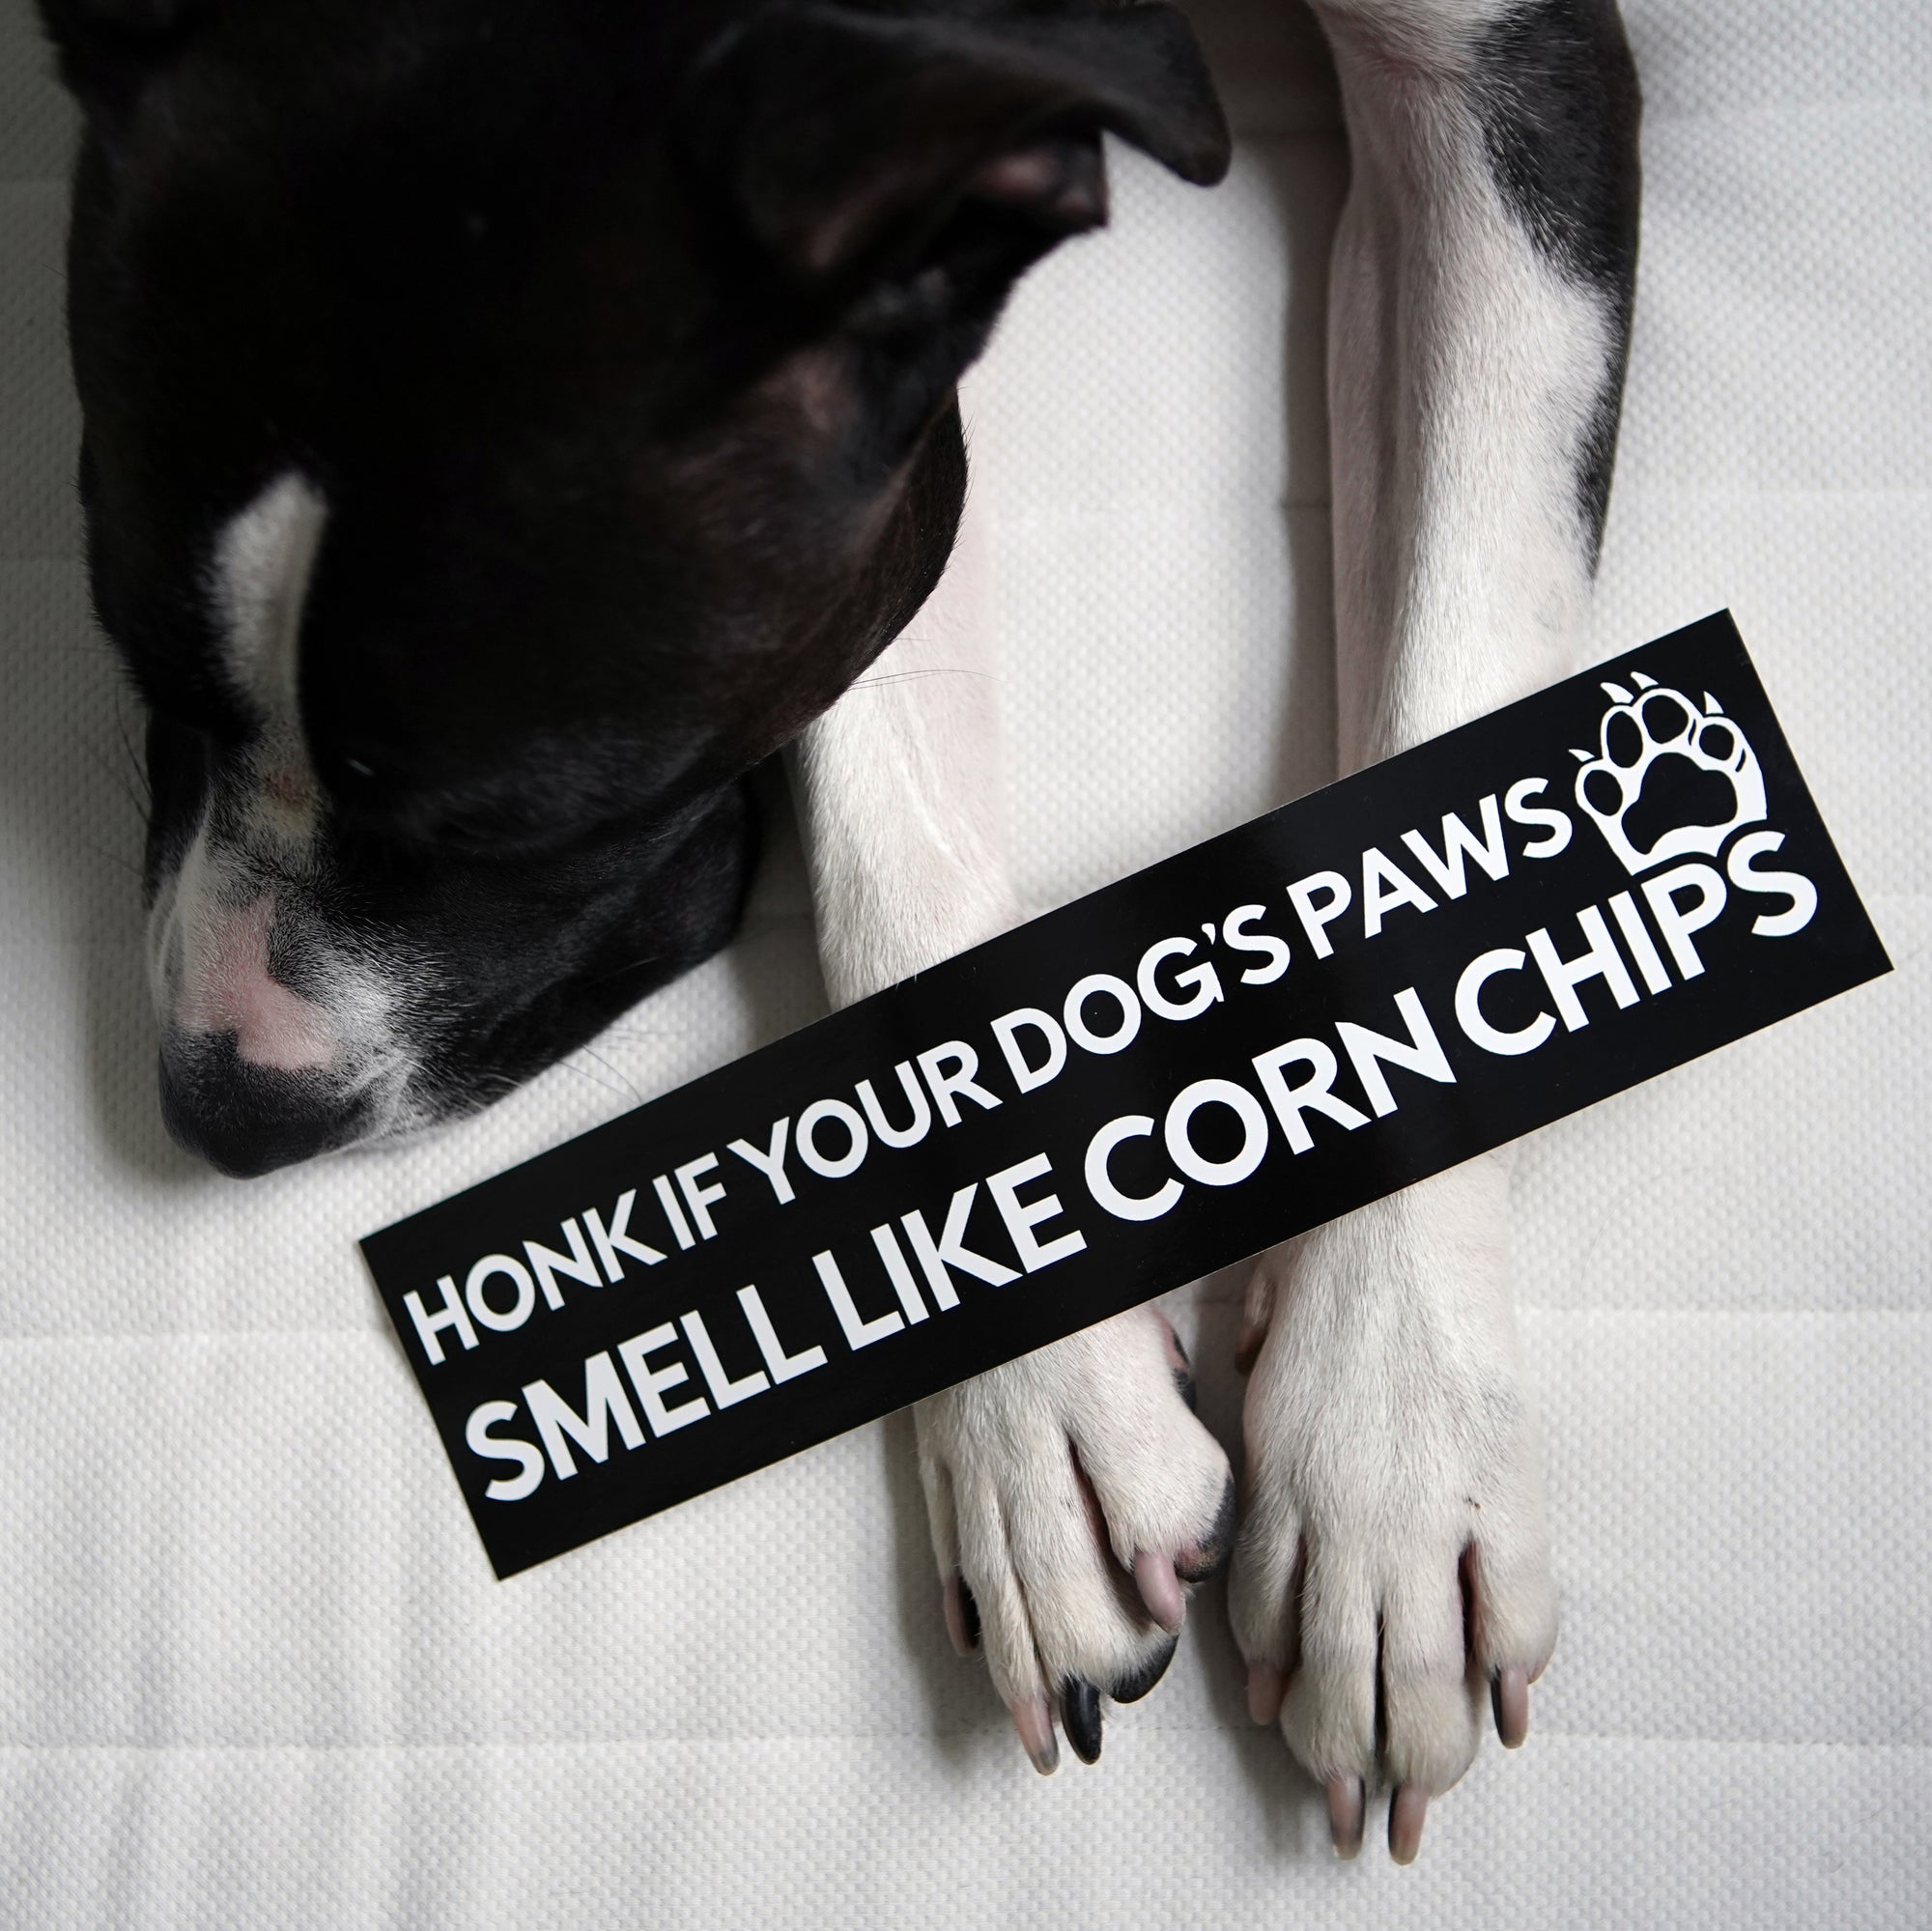 Dog Paws Smell Like Corn Chips Bumper Sticker